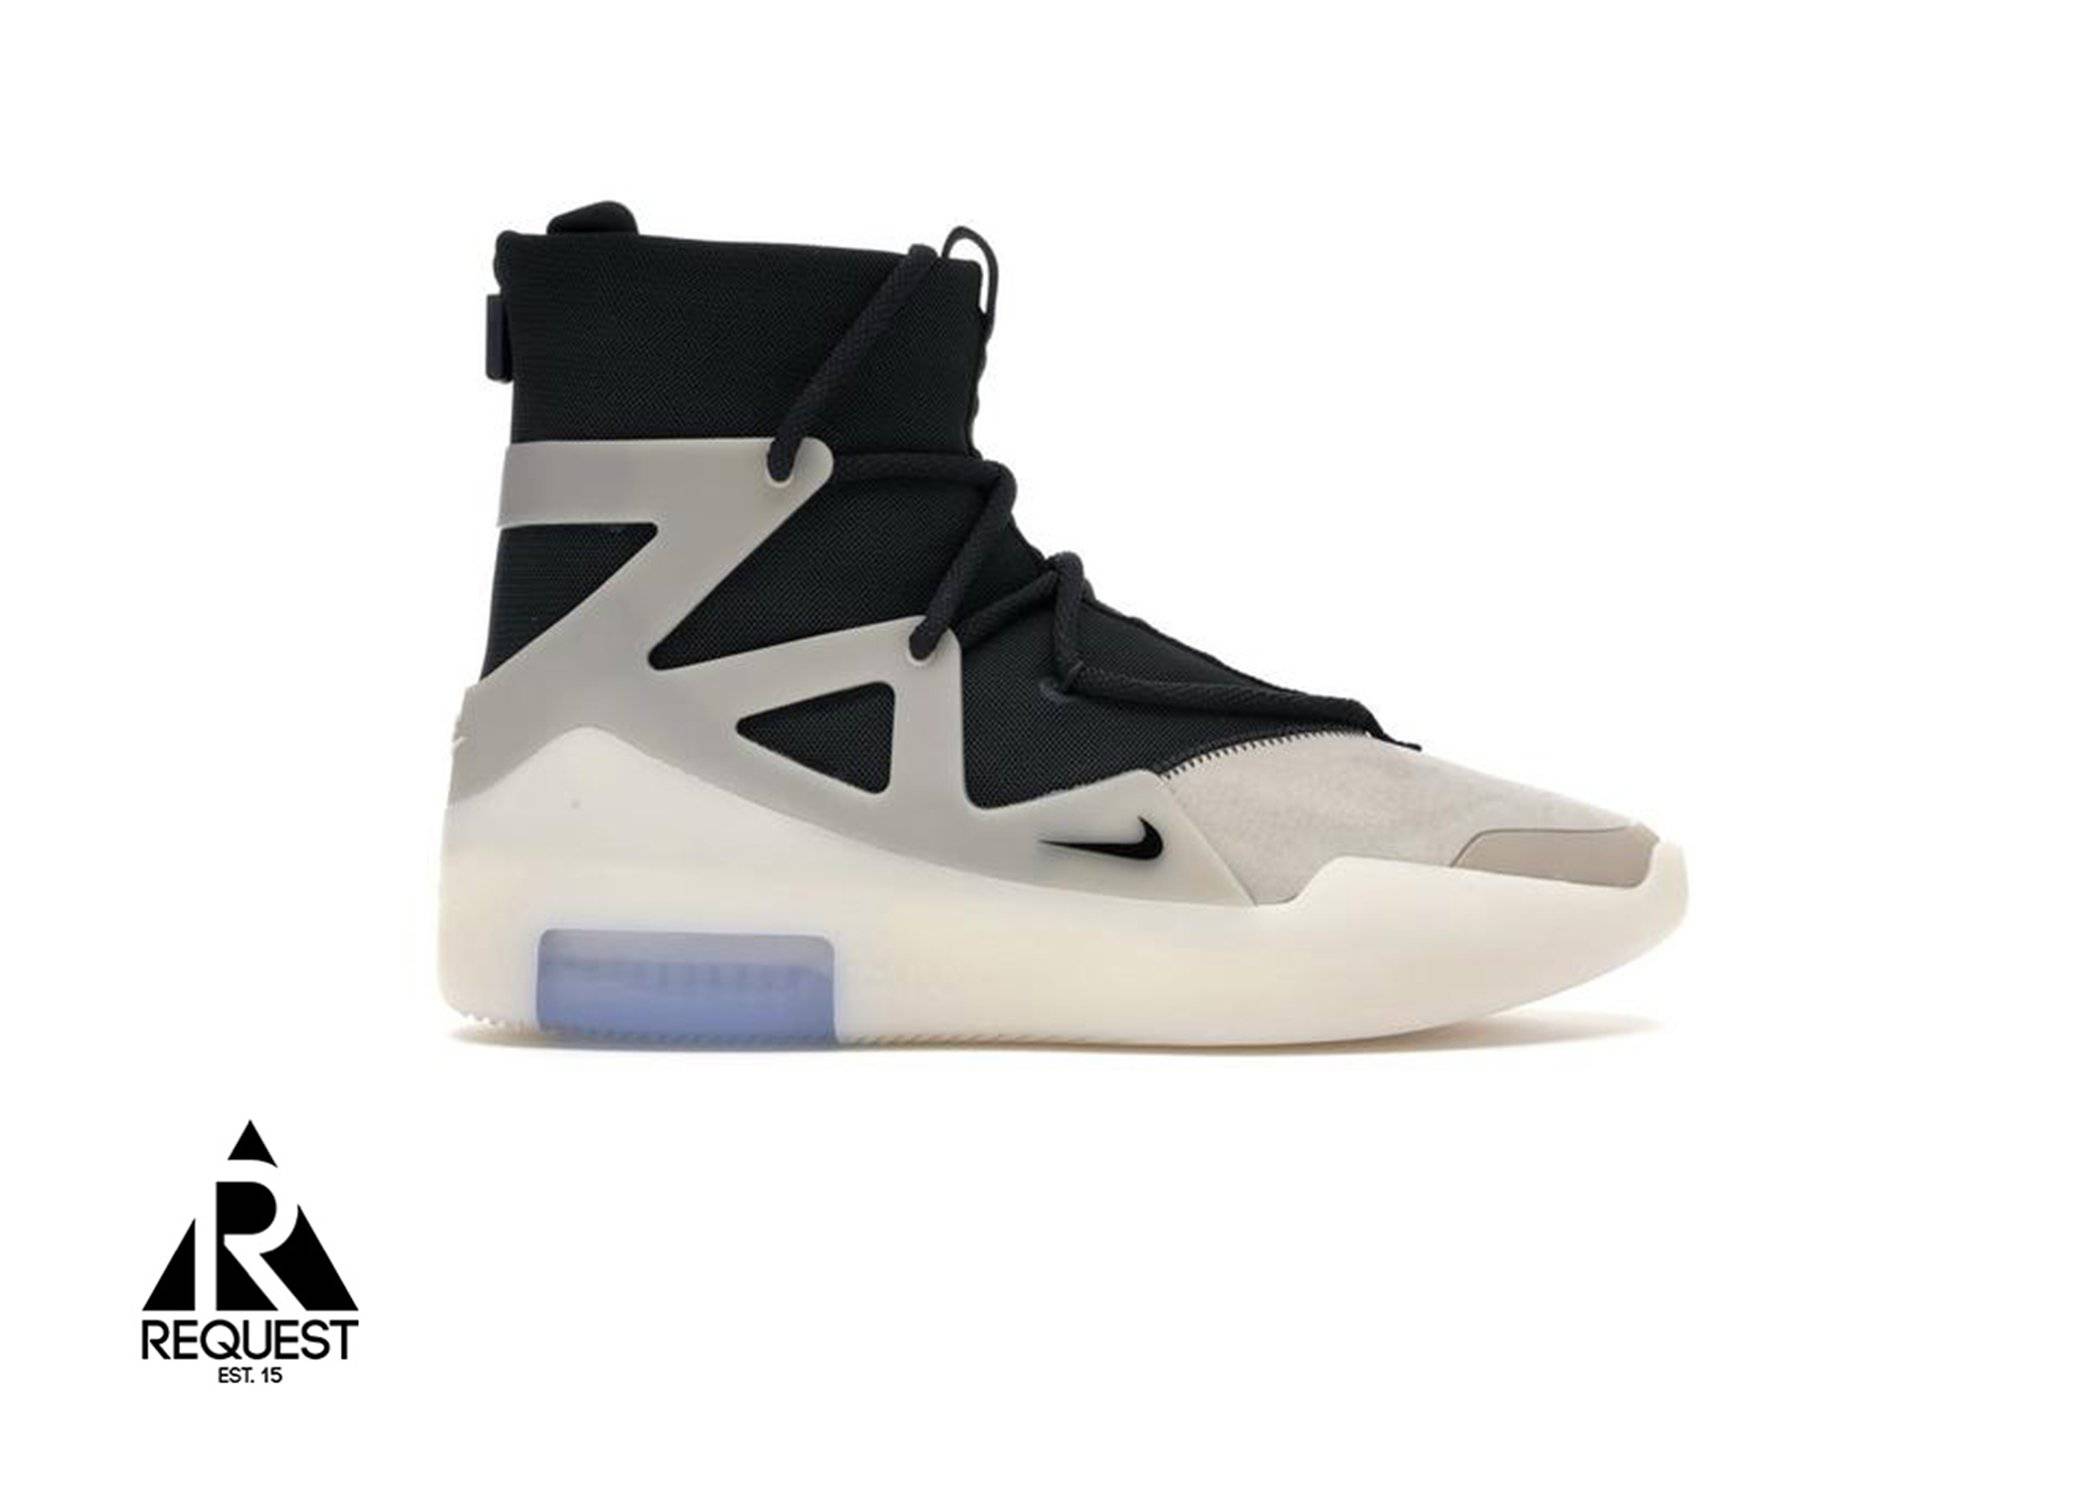 Nike Air Fear Of Fod 1 “The Question”